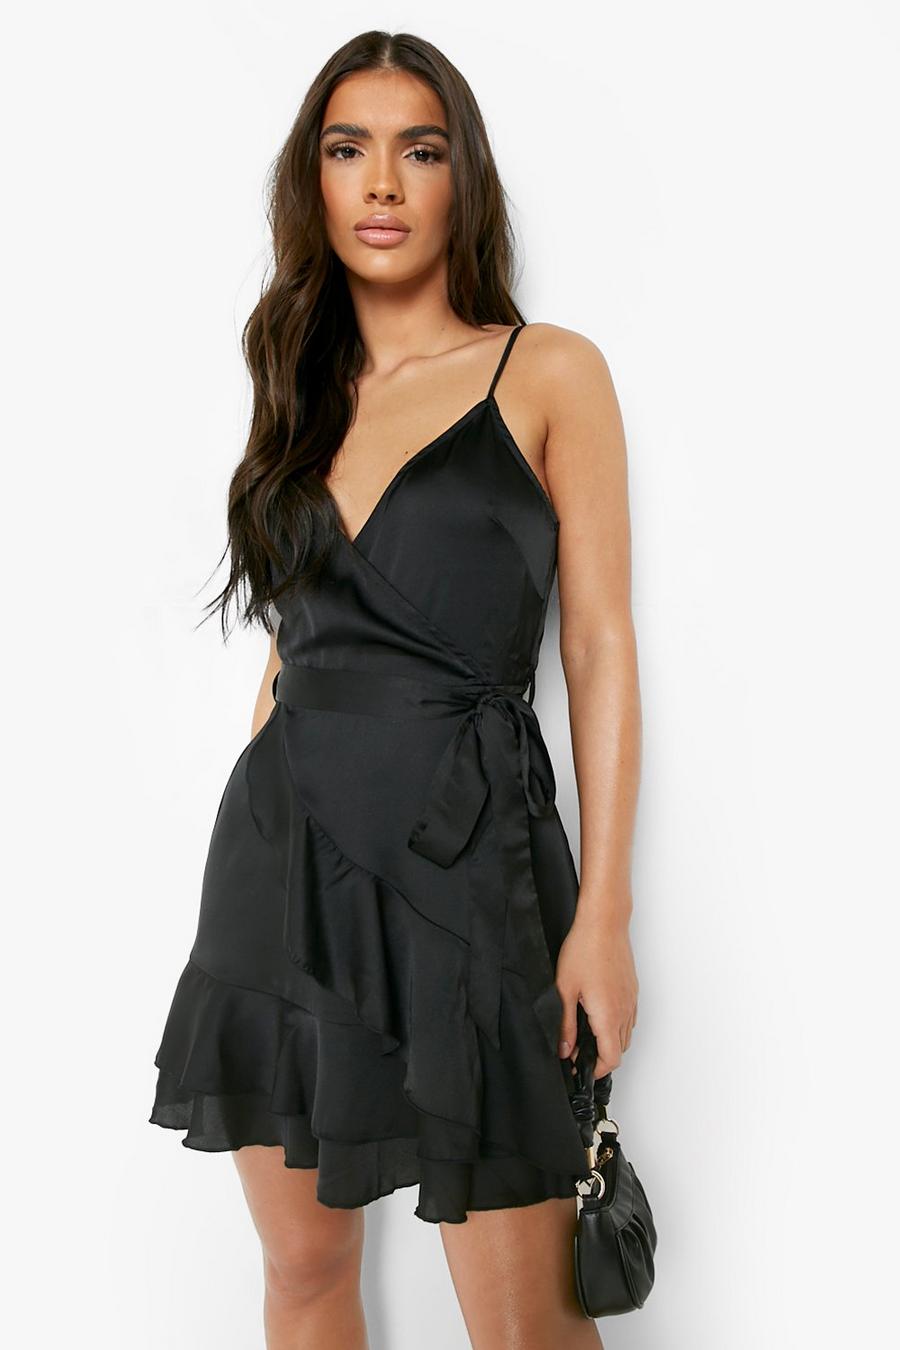 Little Black Wrap Dress - This Wrap Dress Is For Every Body Type